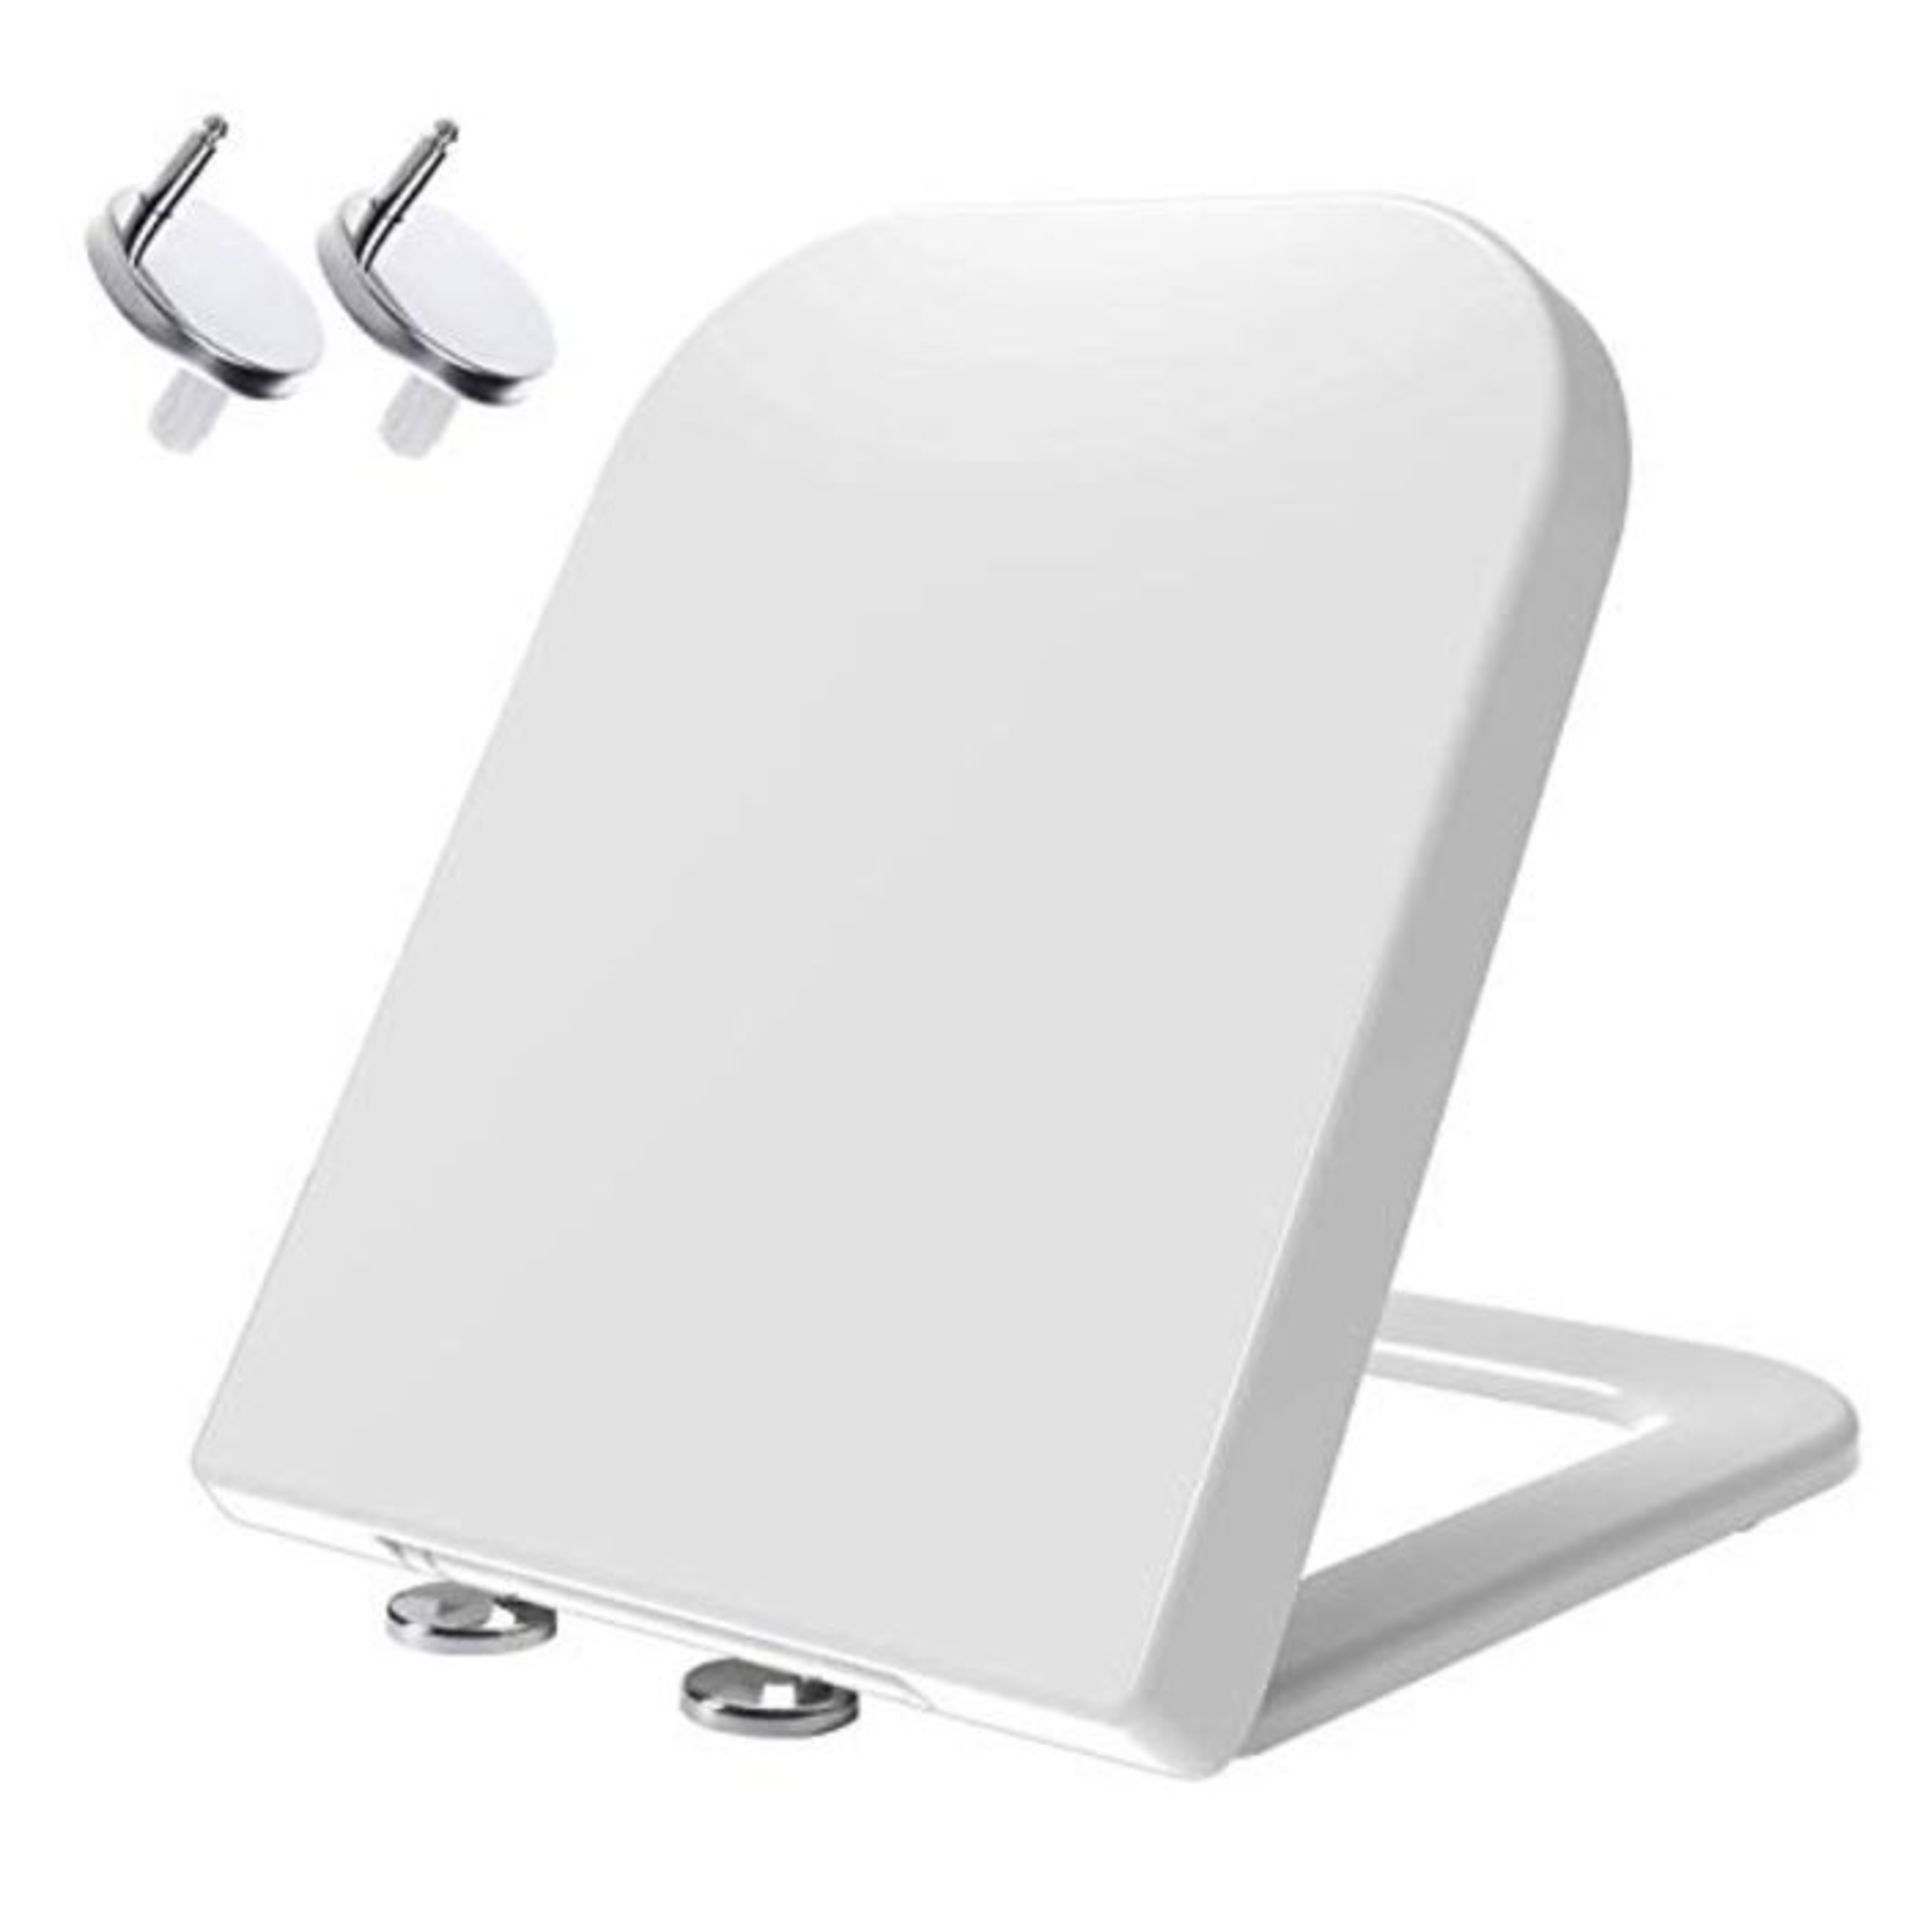 [CRACKED] MASS DYNAMIC Square Toilet Seat, Soft Close Toilet Seat White with Quick Rel